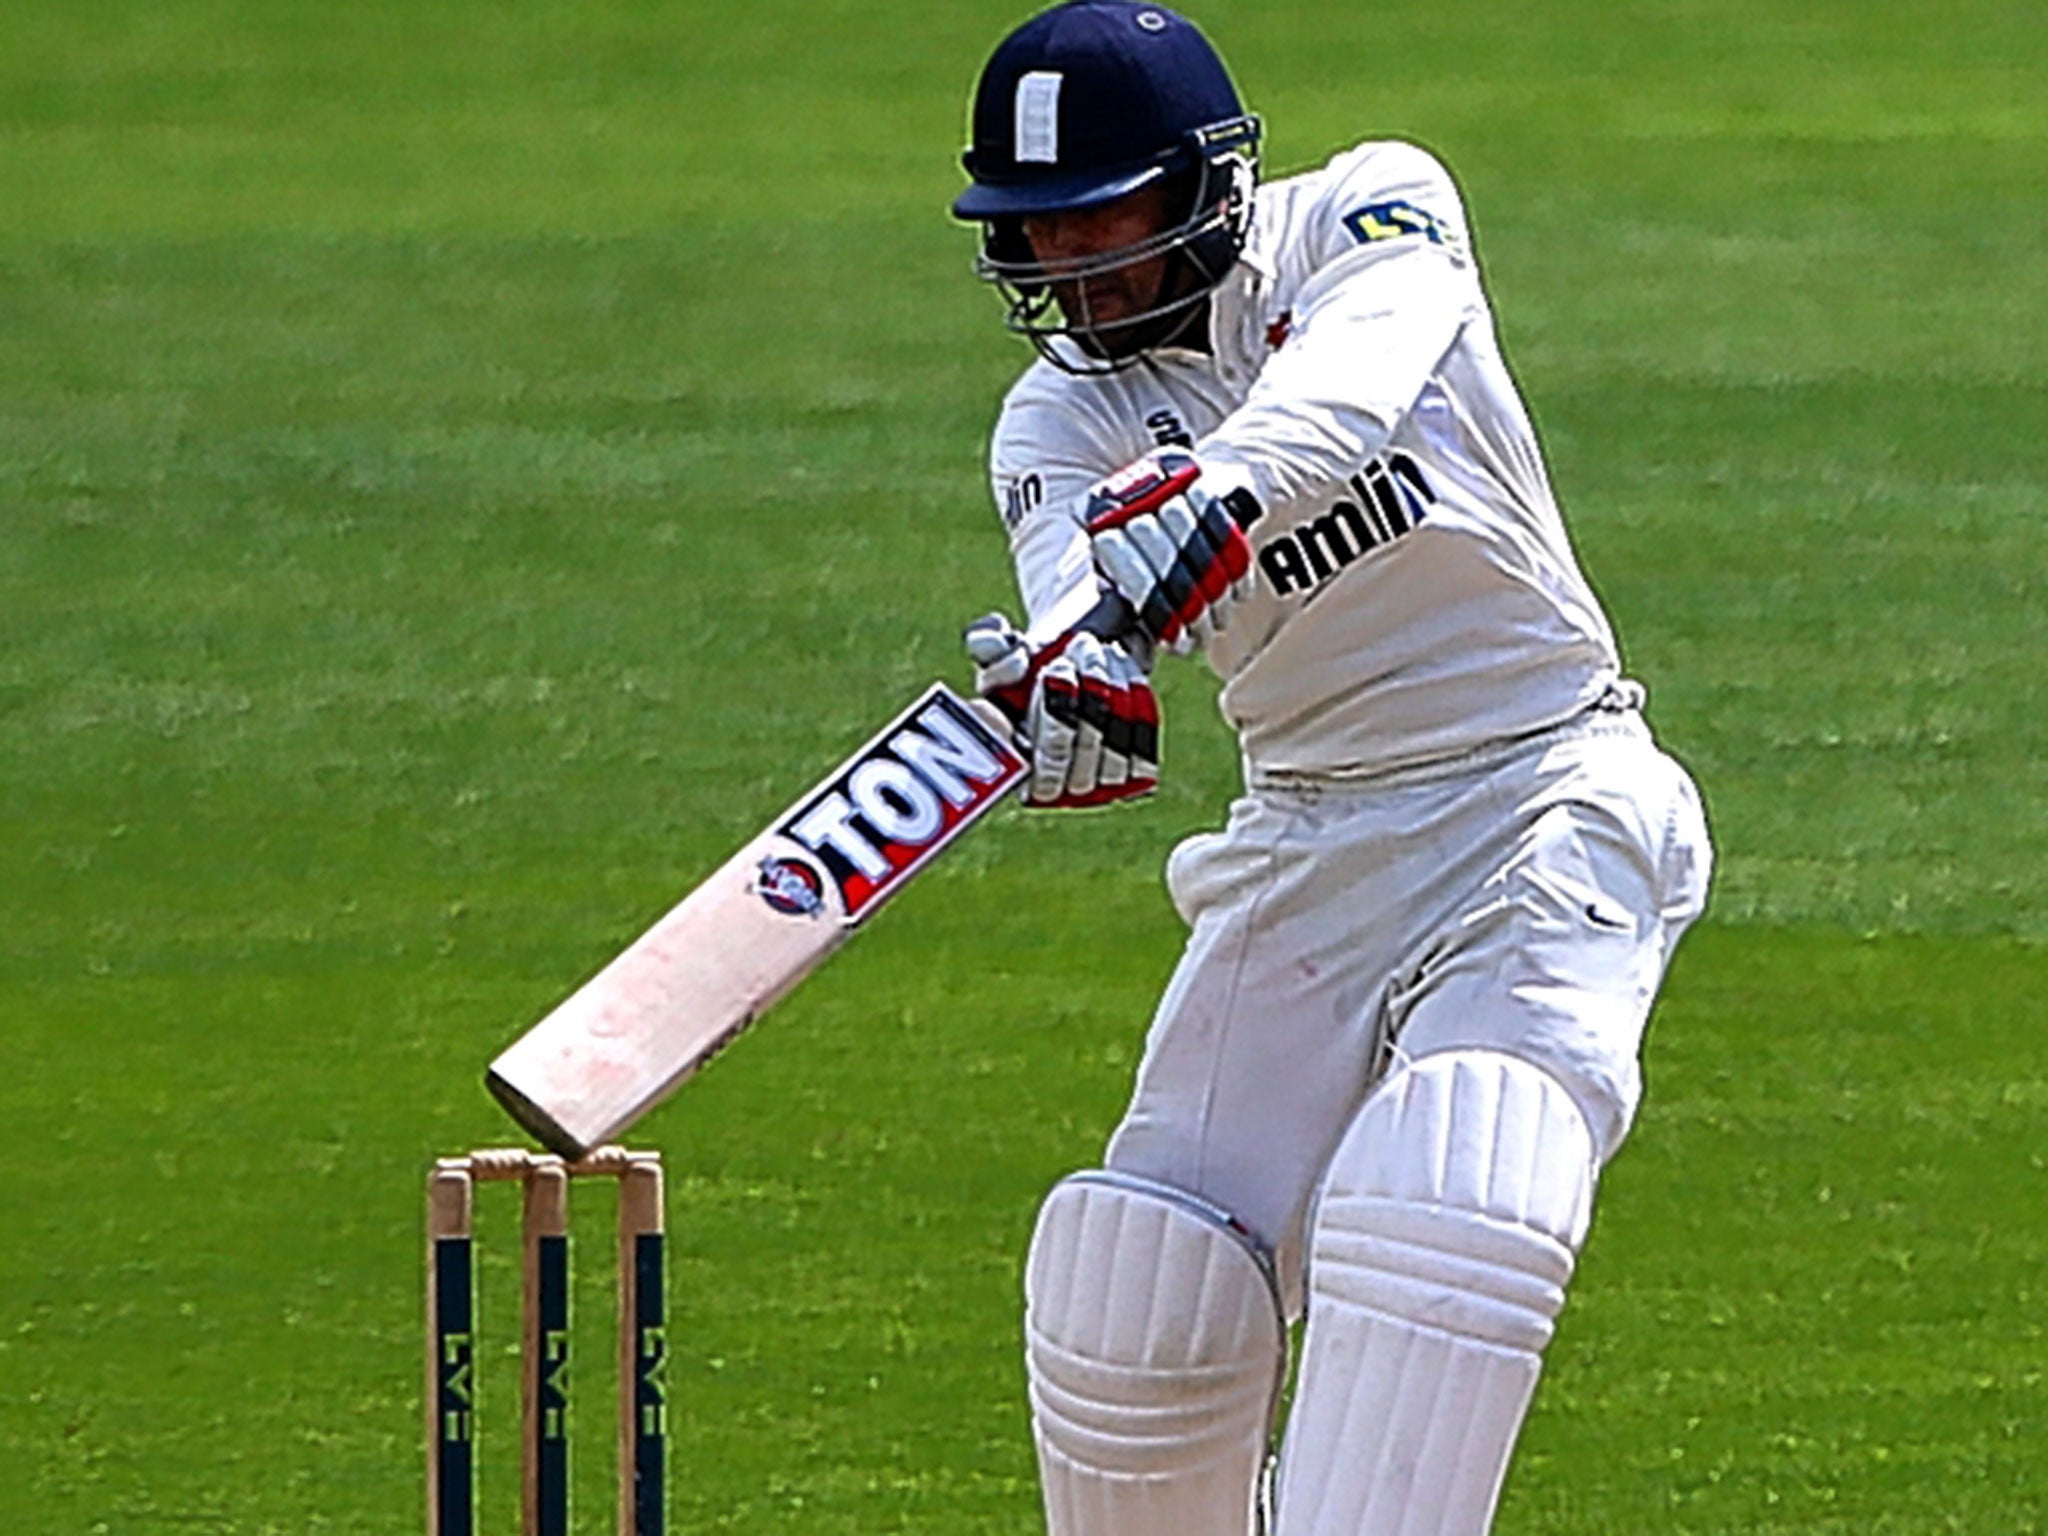 The Essex batsman Ravi Bopara is looking ominously well set against Leicestershire